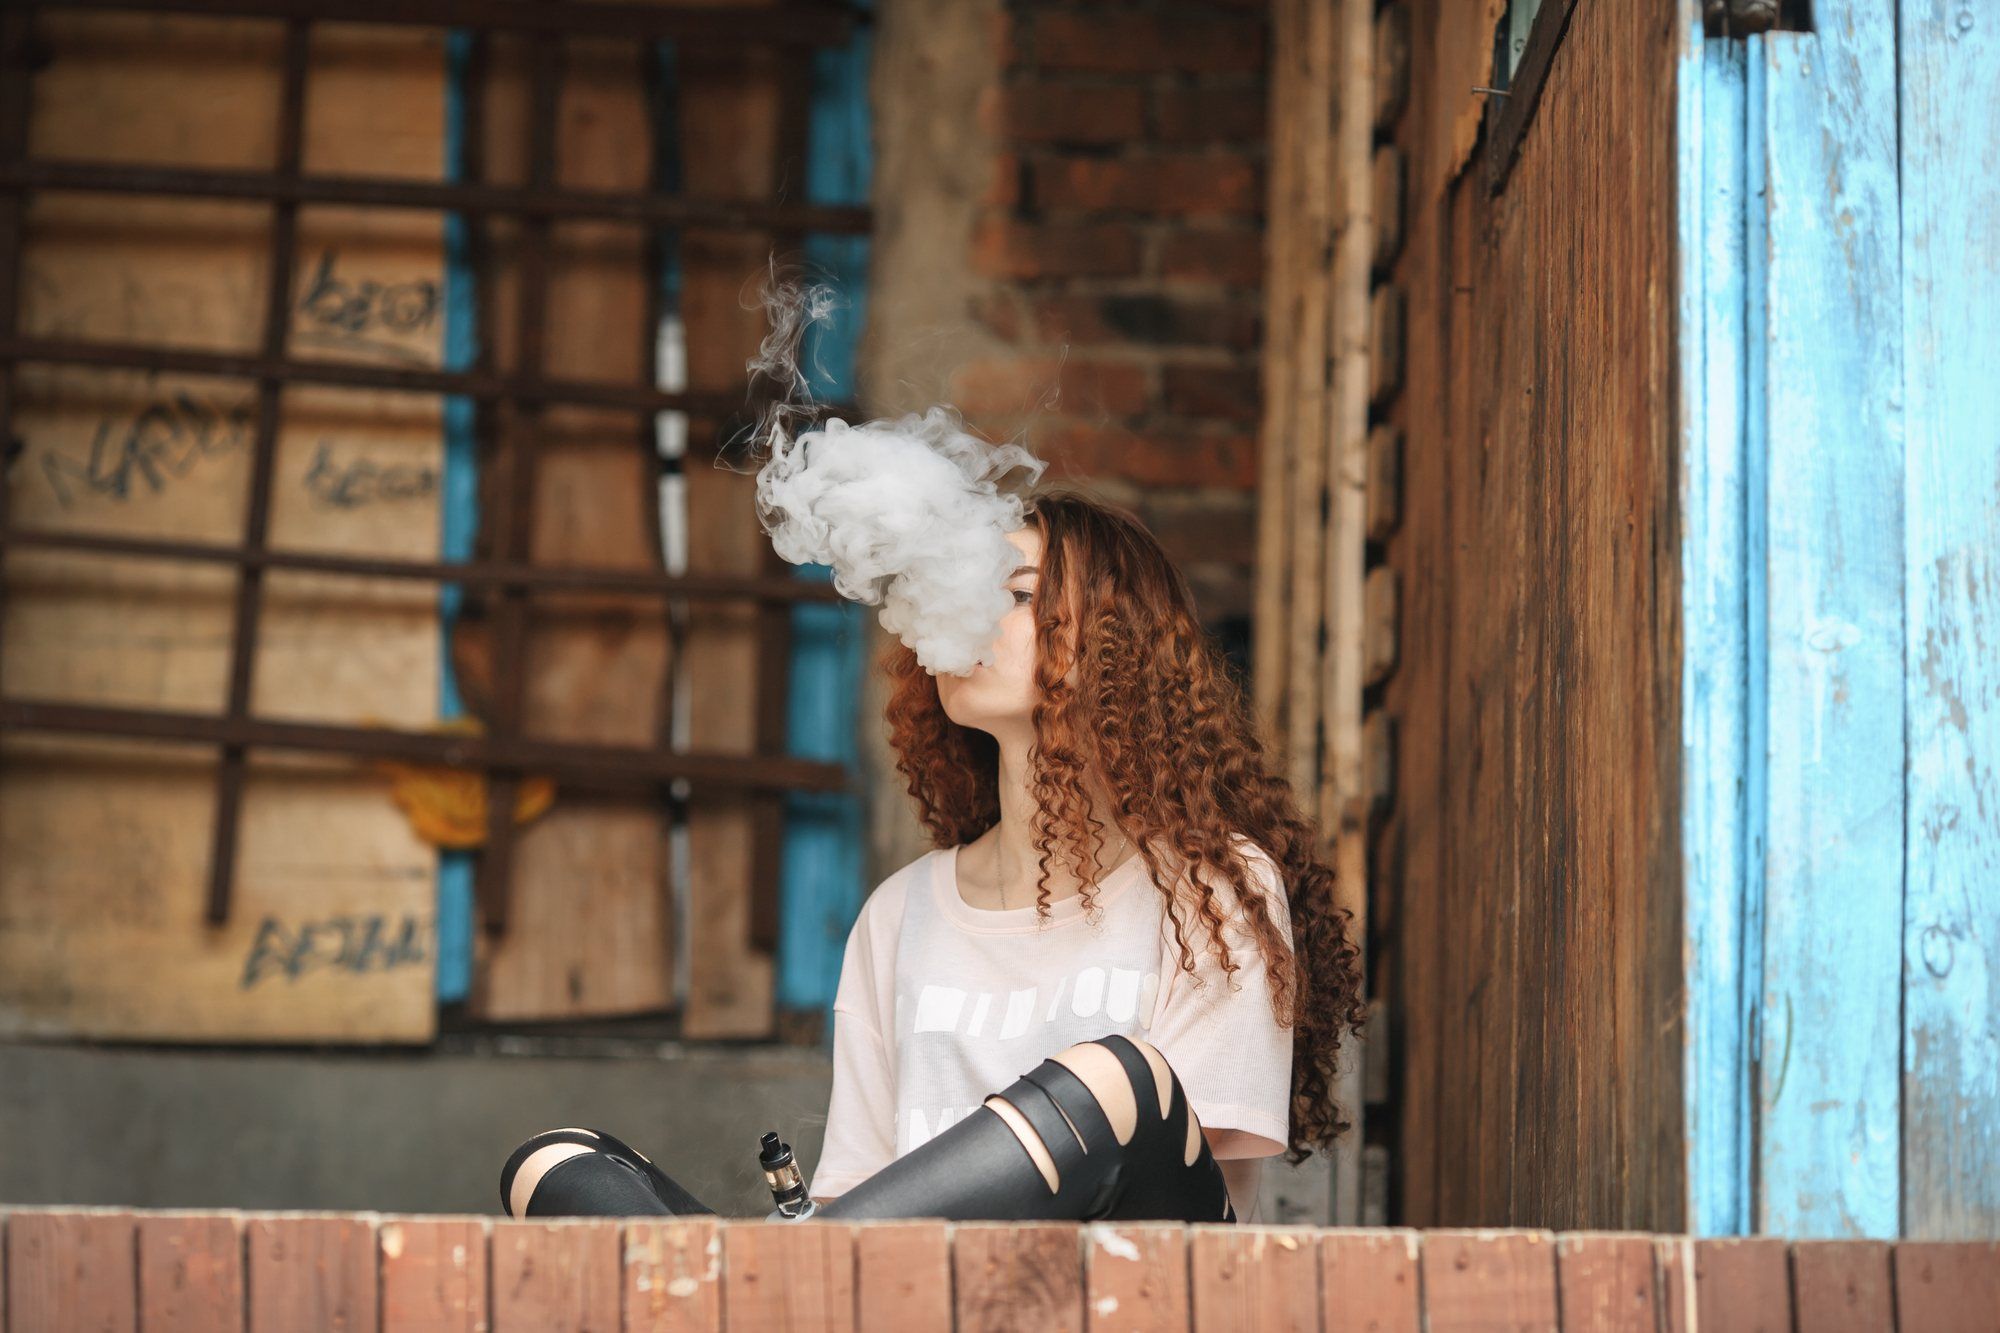 Teen girl vapes and vaping in teens may impose greater risk of COVID19